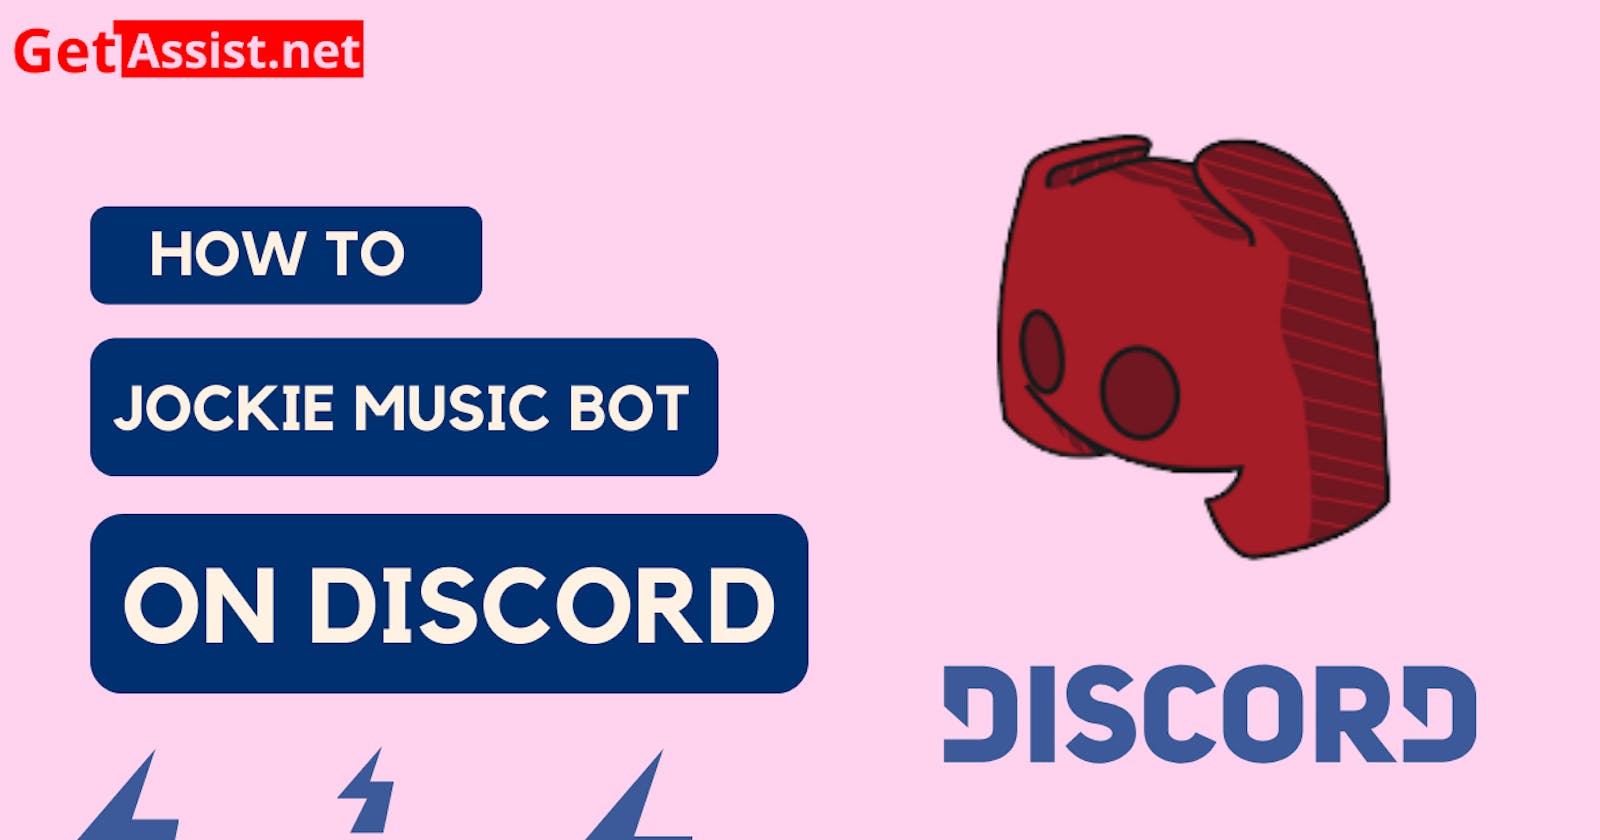 How to Add Jockie Music Bot on Discord?